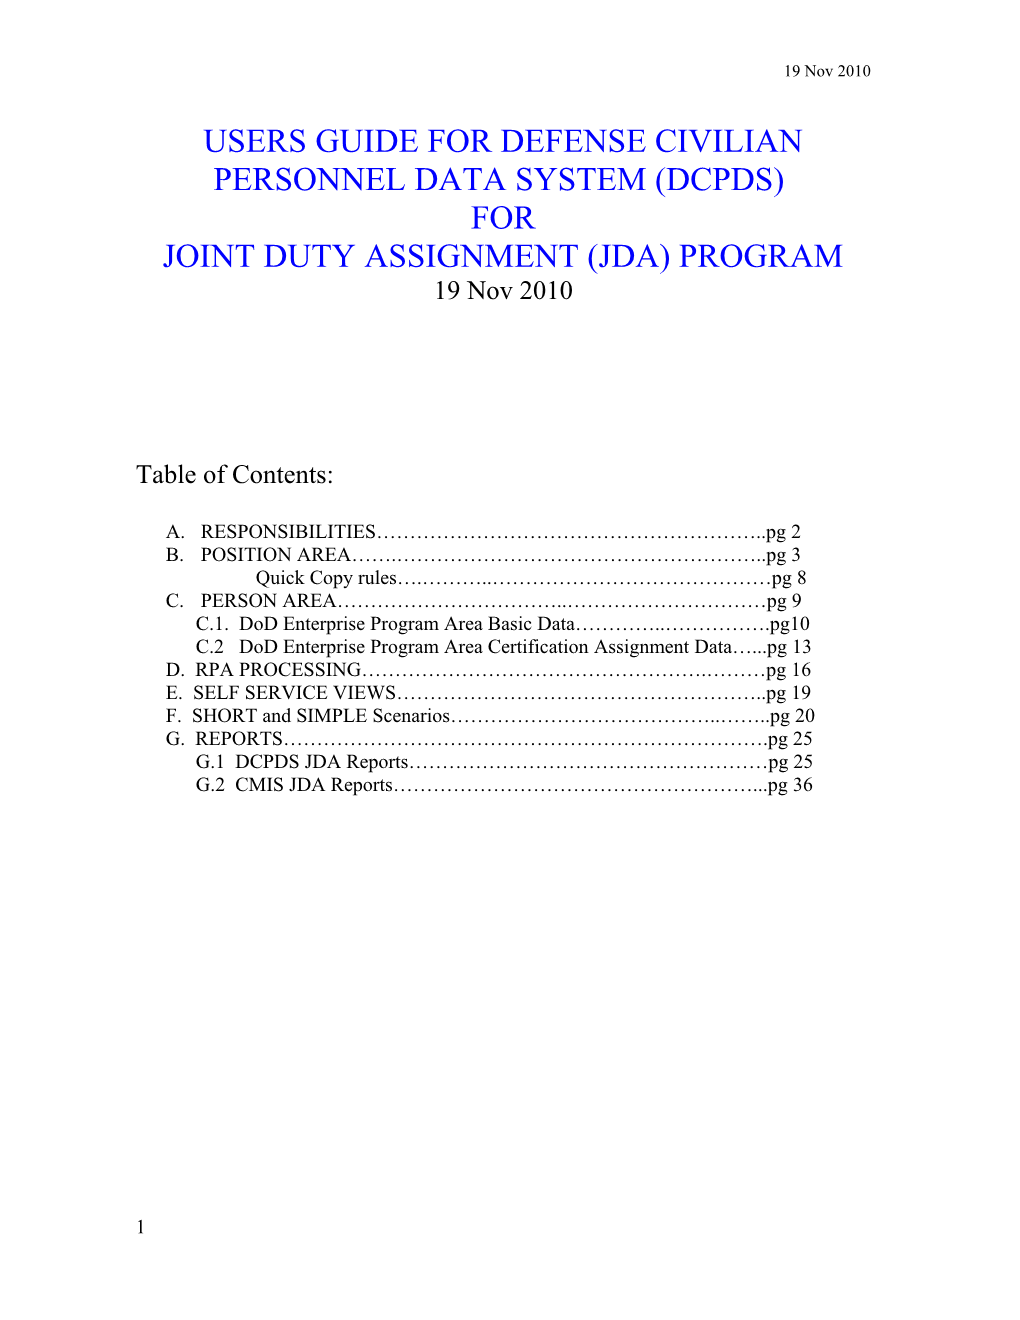 Users Guide for Defense Civilian Personnel Data System (Dcpds)